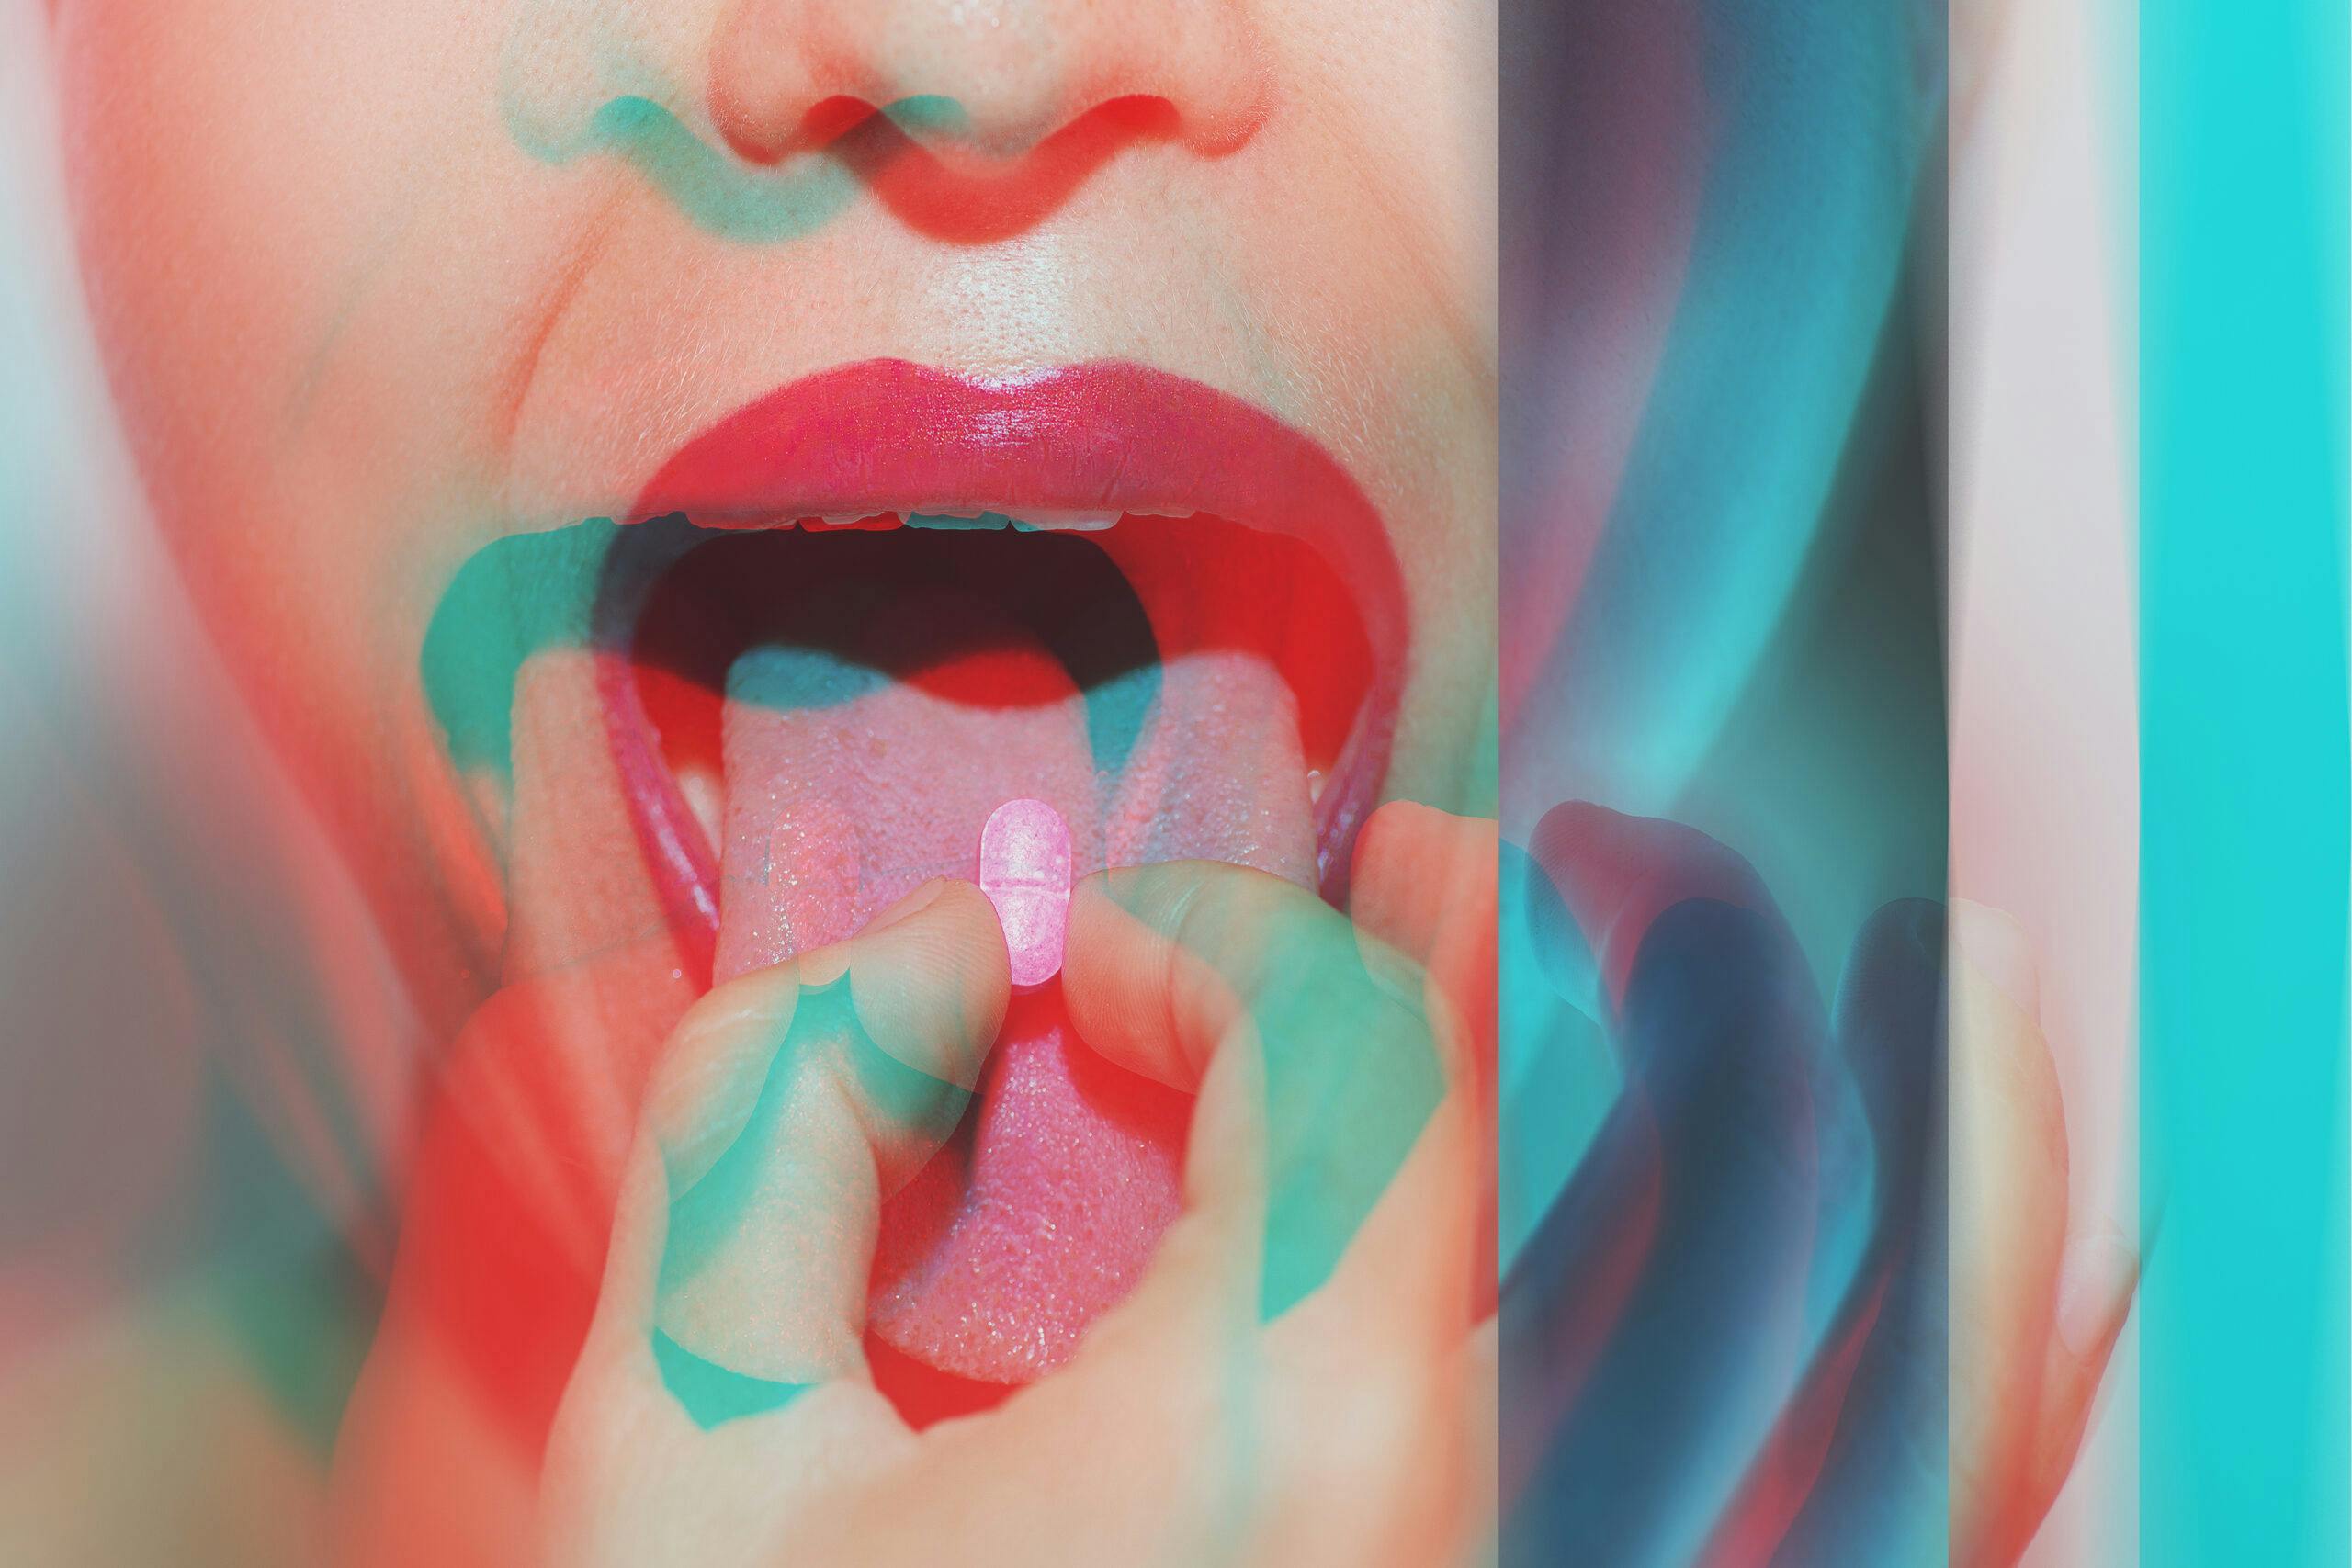 psychedelic woman taking ecstasy pill